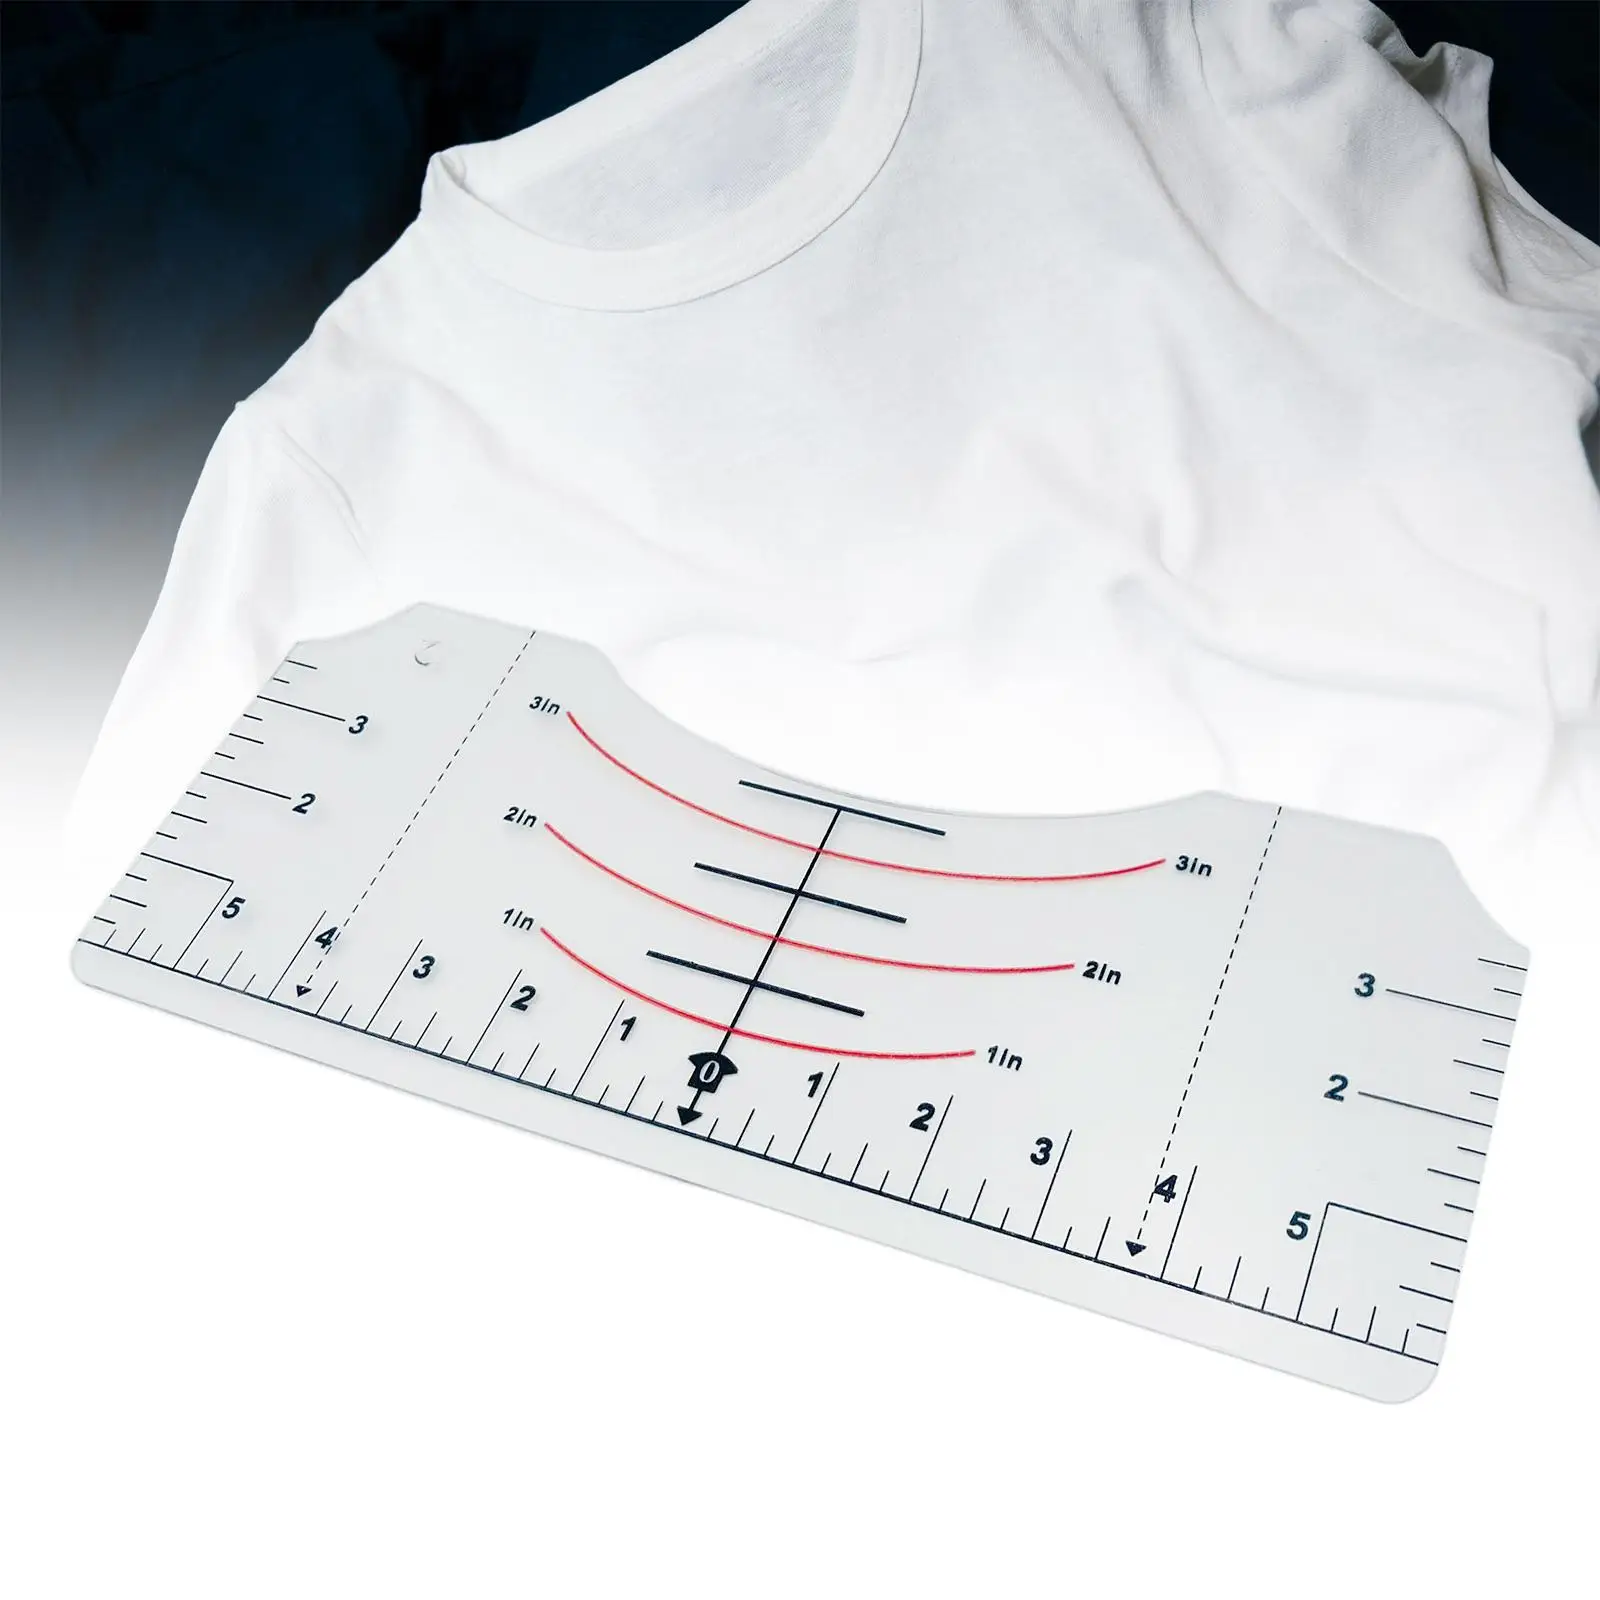 T Shirt Ruler Guide, T Shirt Alignment Tool, Acrylic Ruler for Alignment to Center Designs, Tshirt Printing Guide